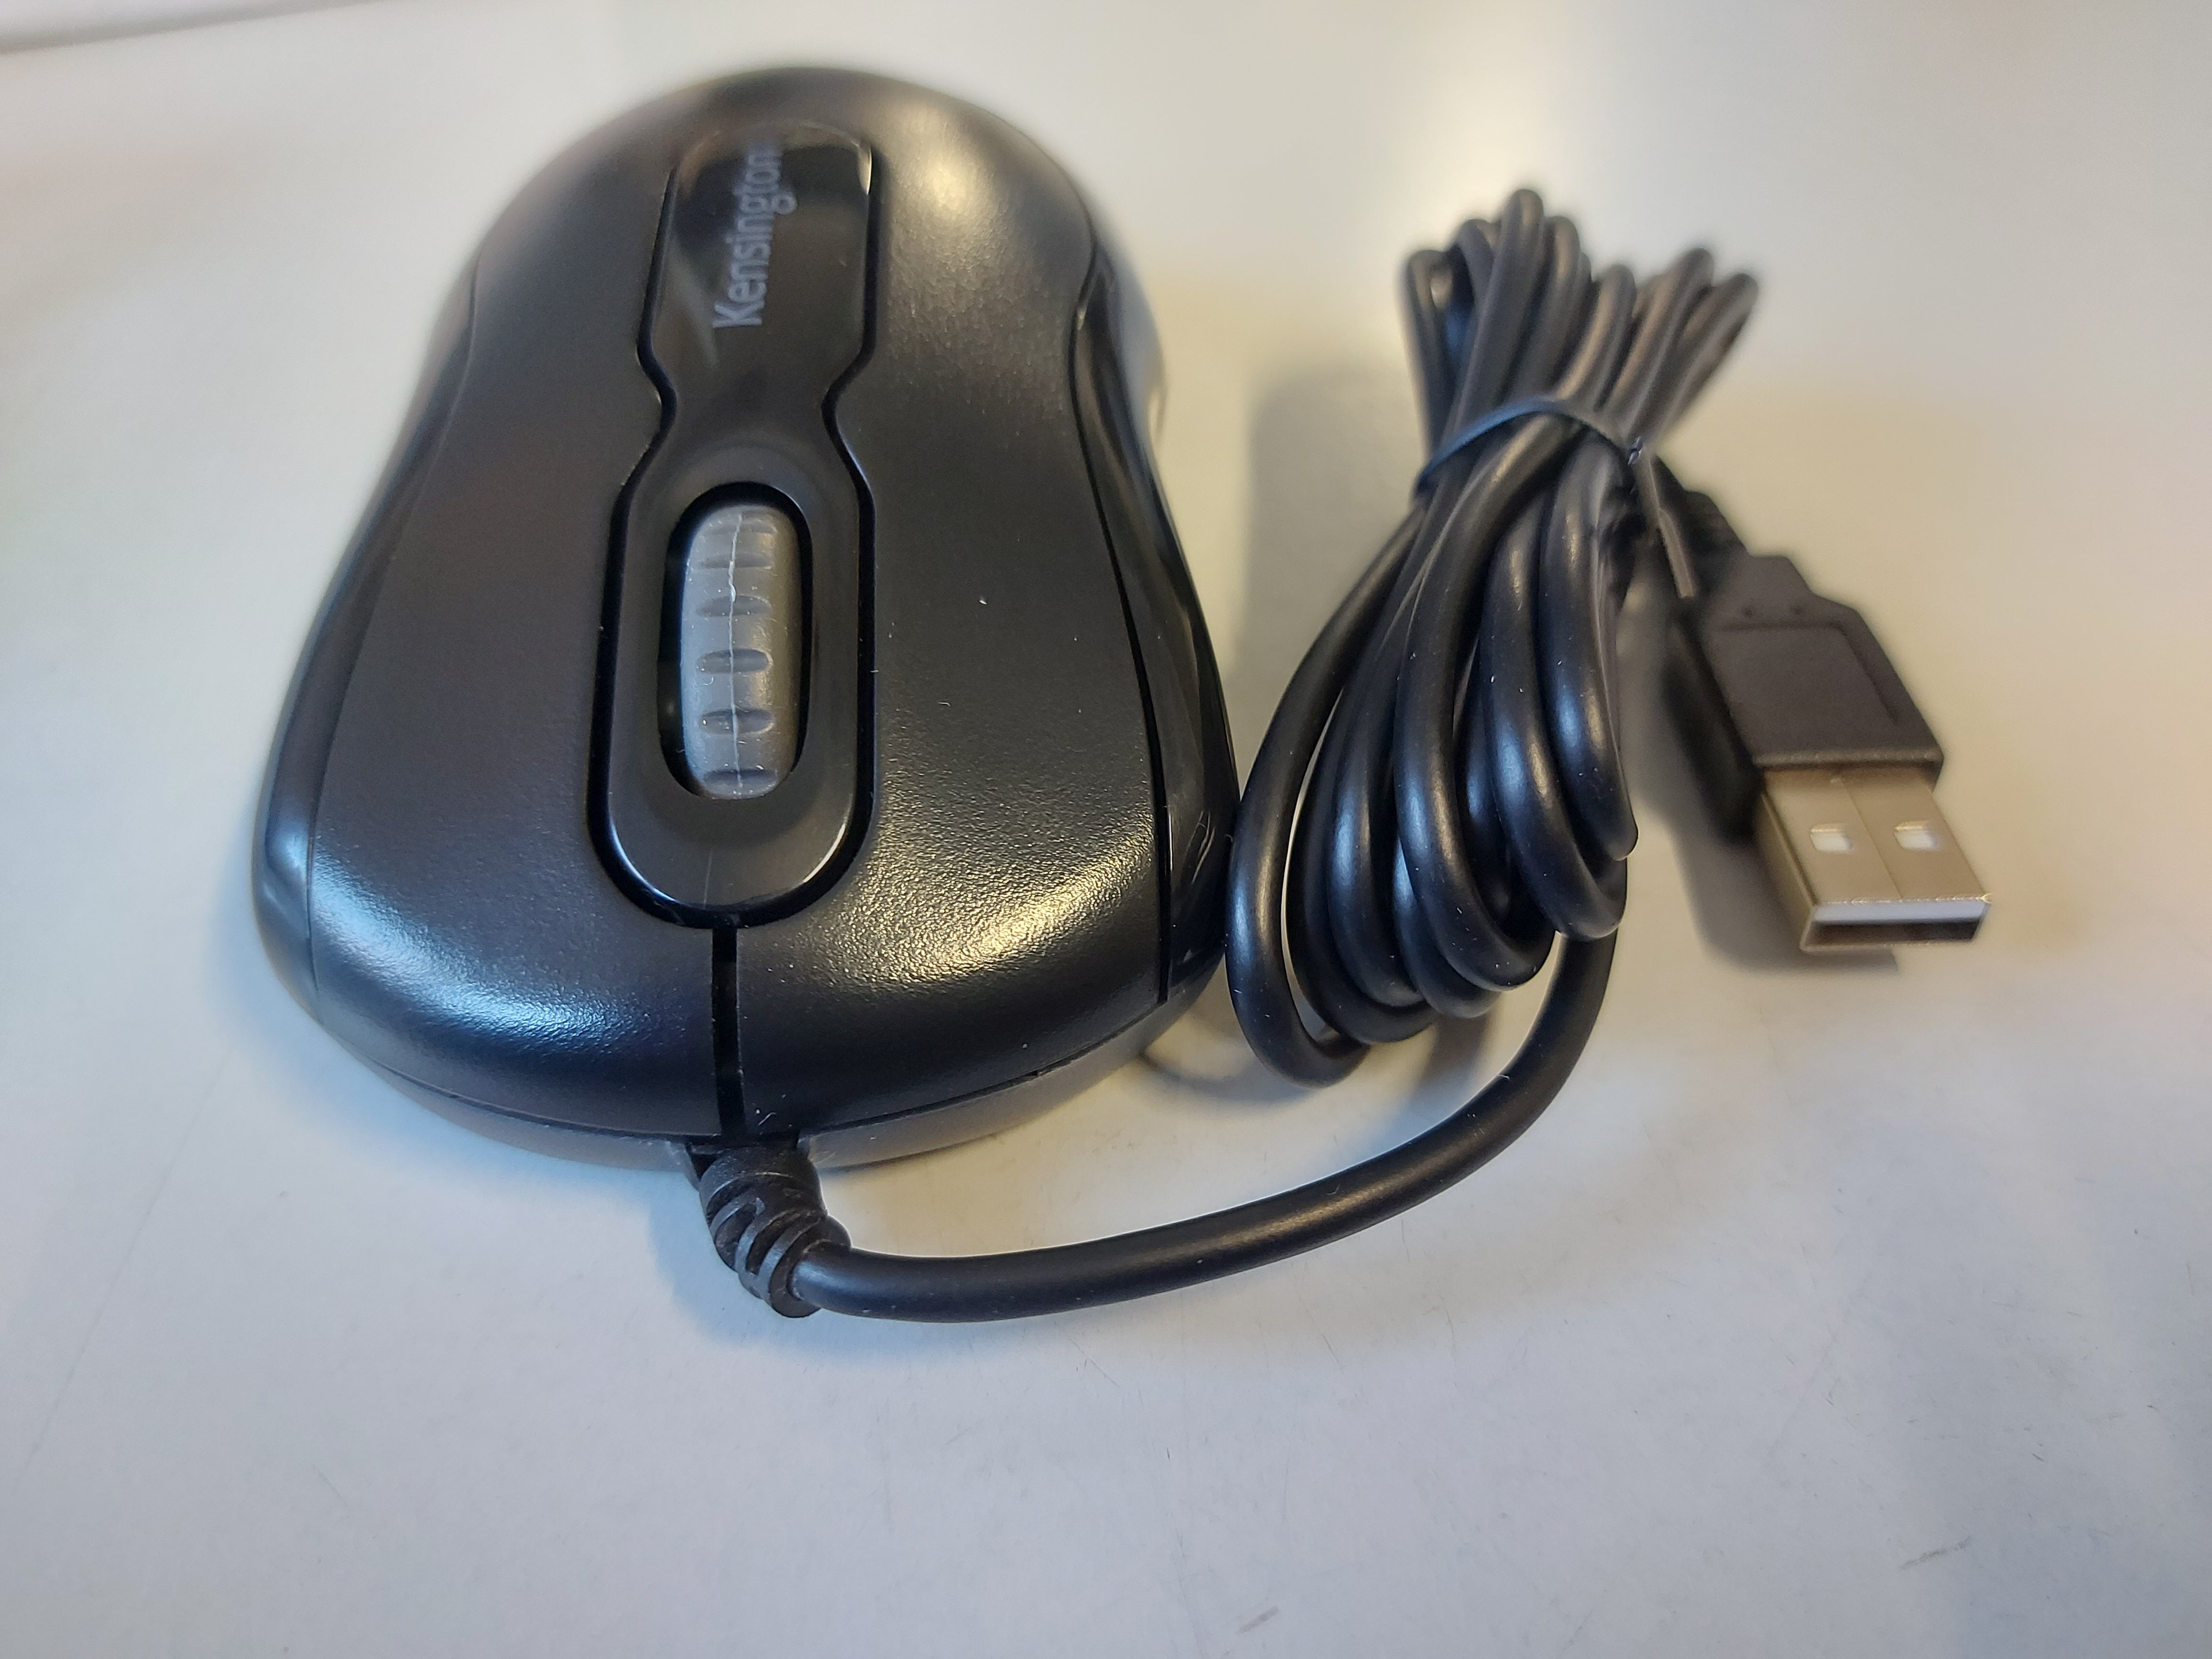 Kensington Mouse-In-A-Box Wired Optical USB Mouse ( K72356EU M01215 ) NOB